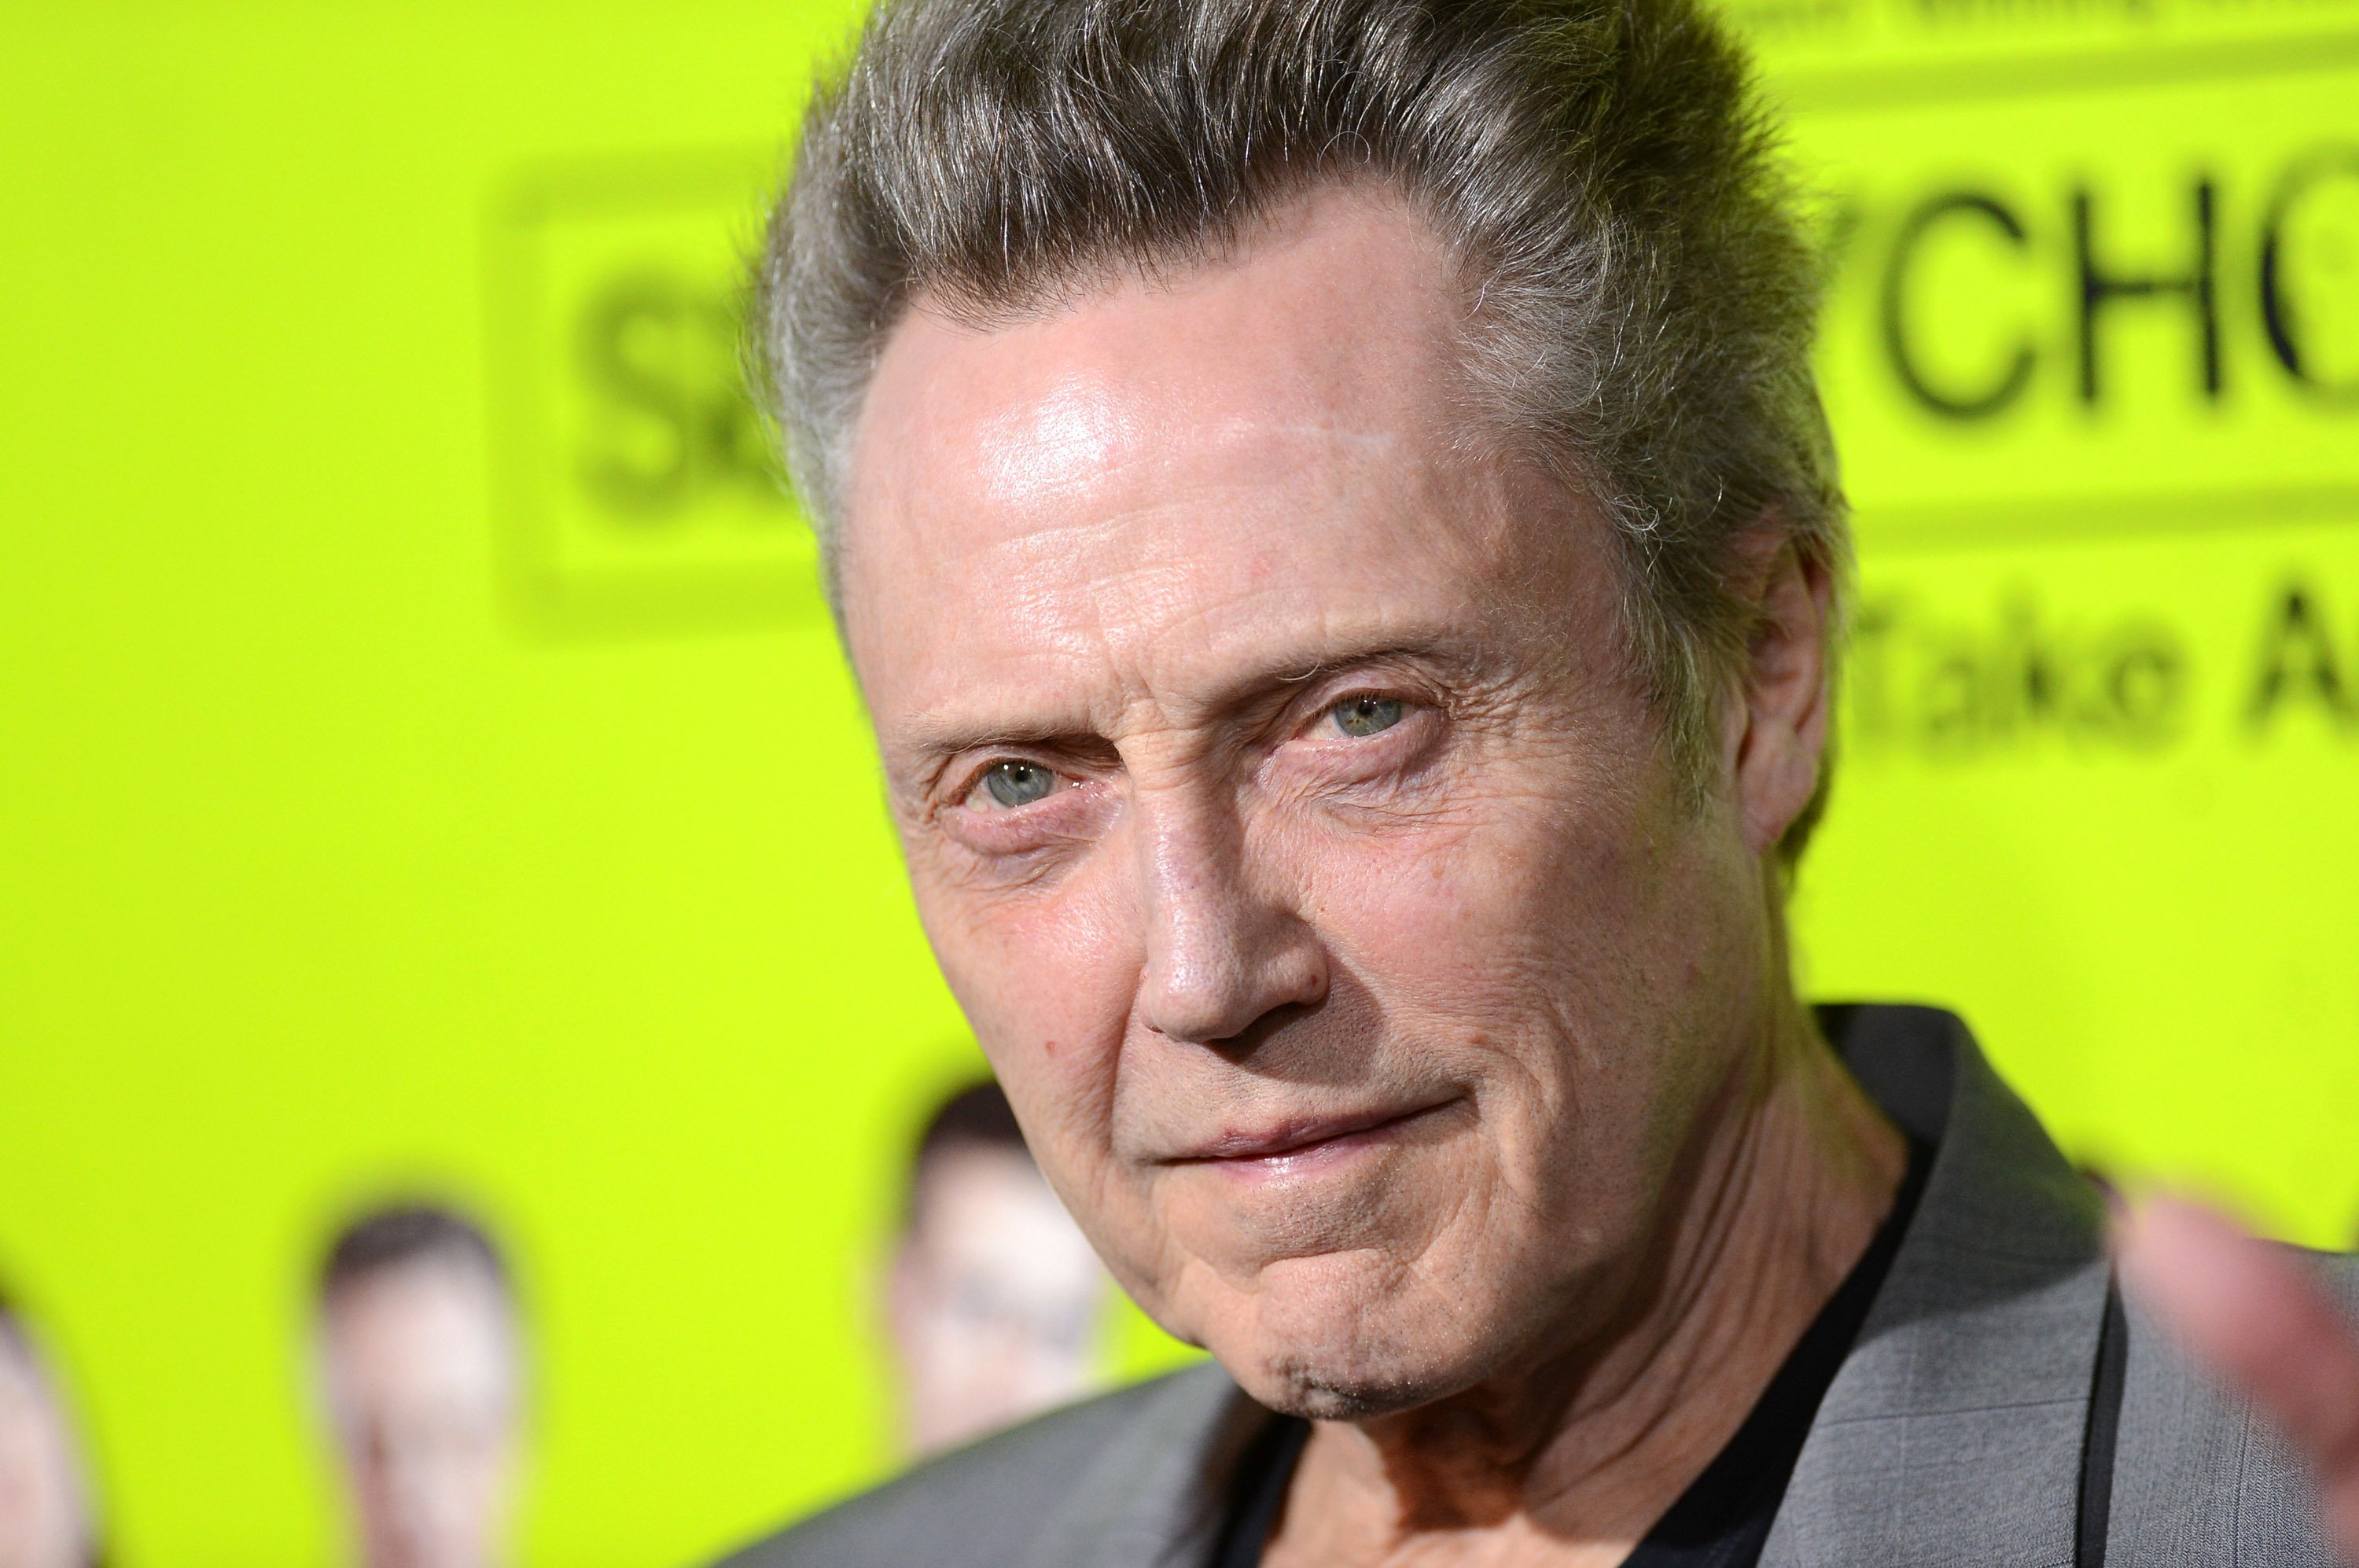 Christopher Walken arrives at the premiere of CBS Films' "Seven Psychopaths" at Mann Bruin Theatre on October 1, 2012 in Westwood, California | Source: Getty Images